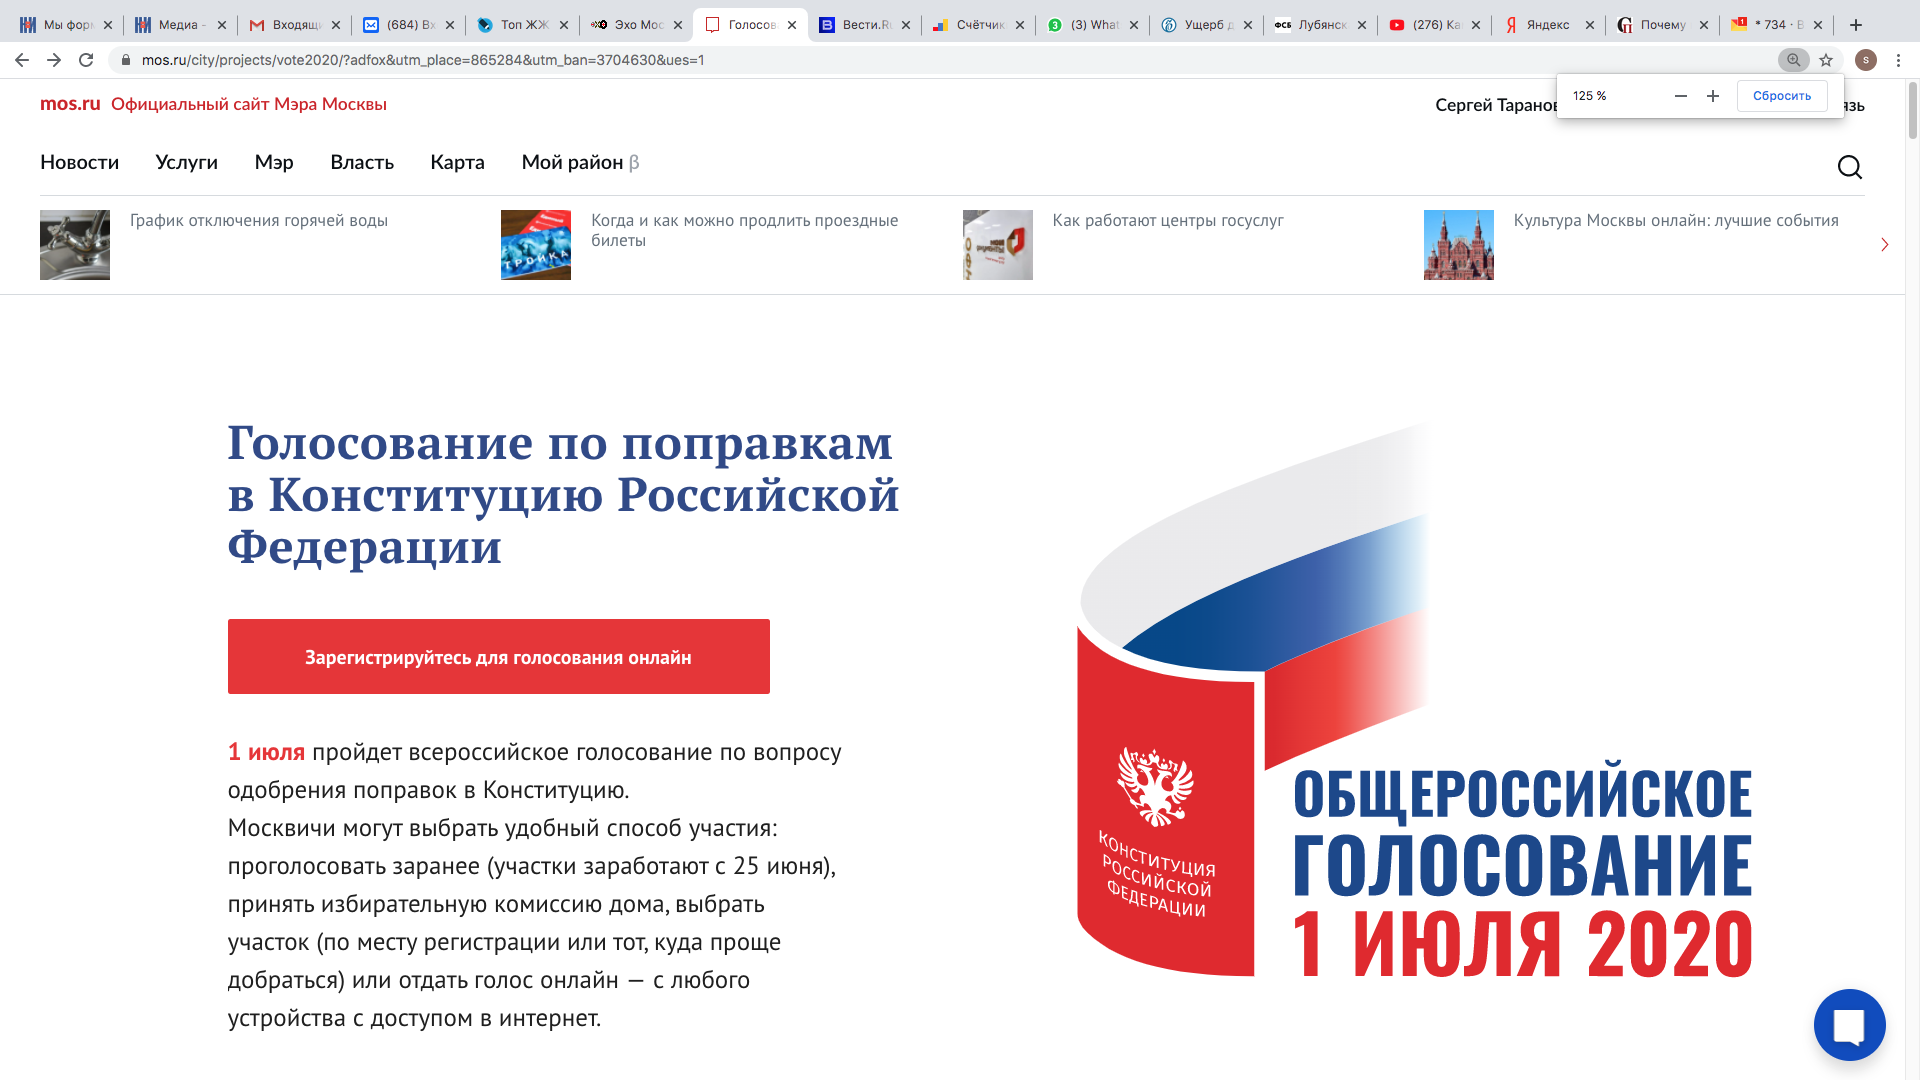 Mos.ru site does not allow citizens to register for the online voting on the Constitution